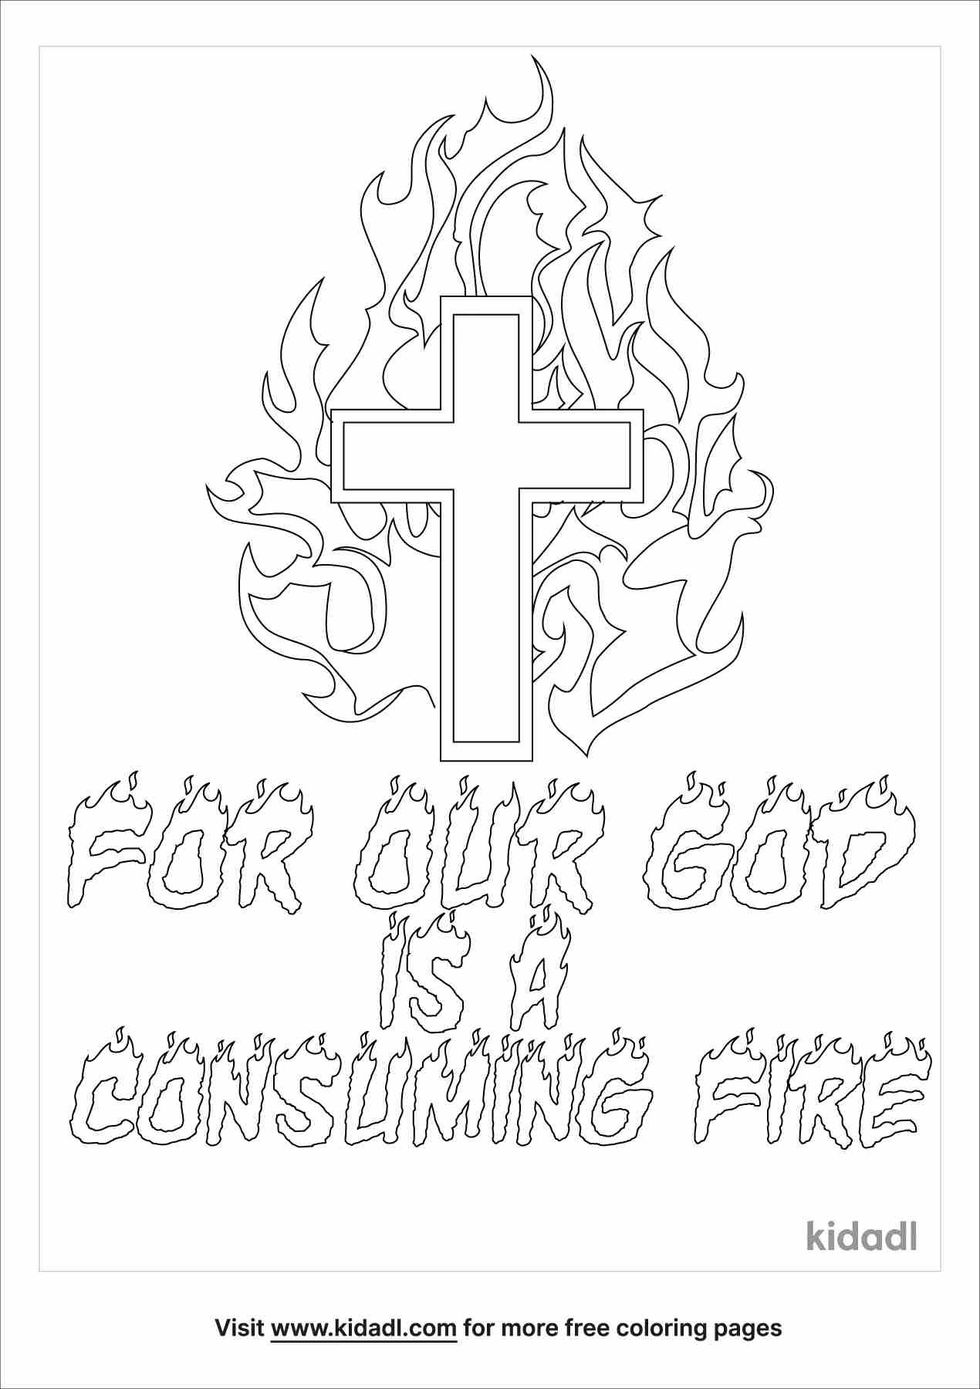 God is a consuming fire art and coloring page for kids.